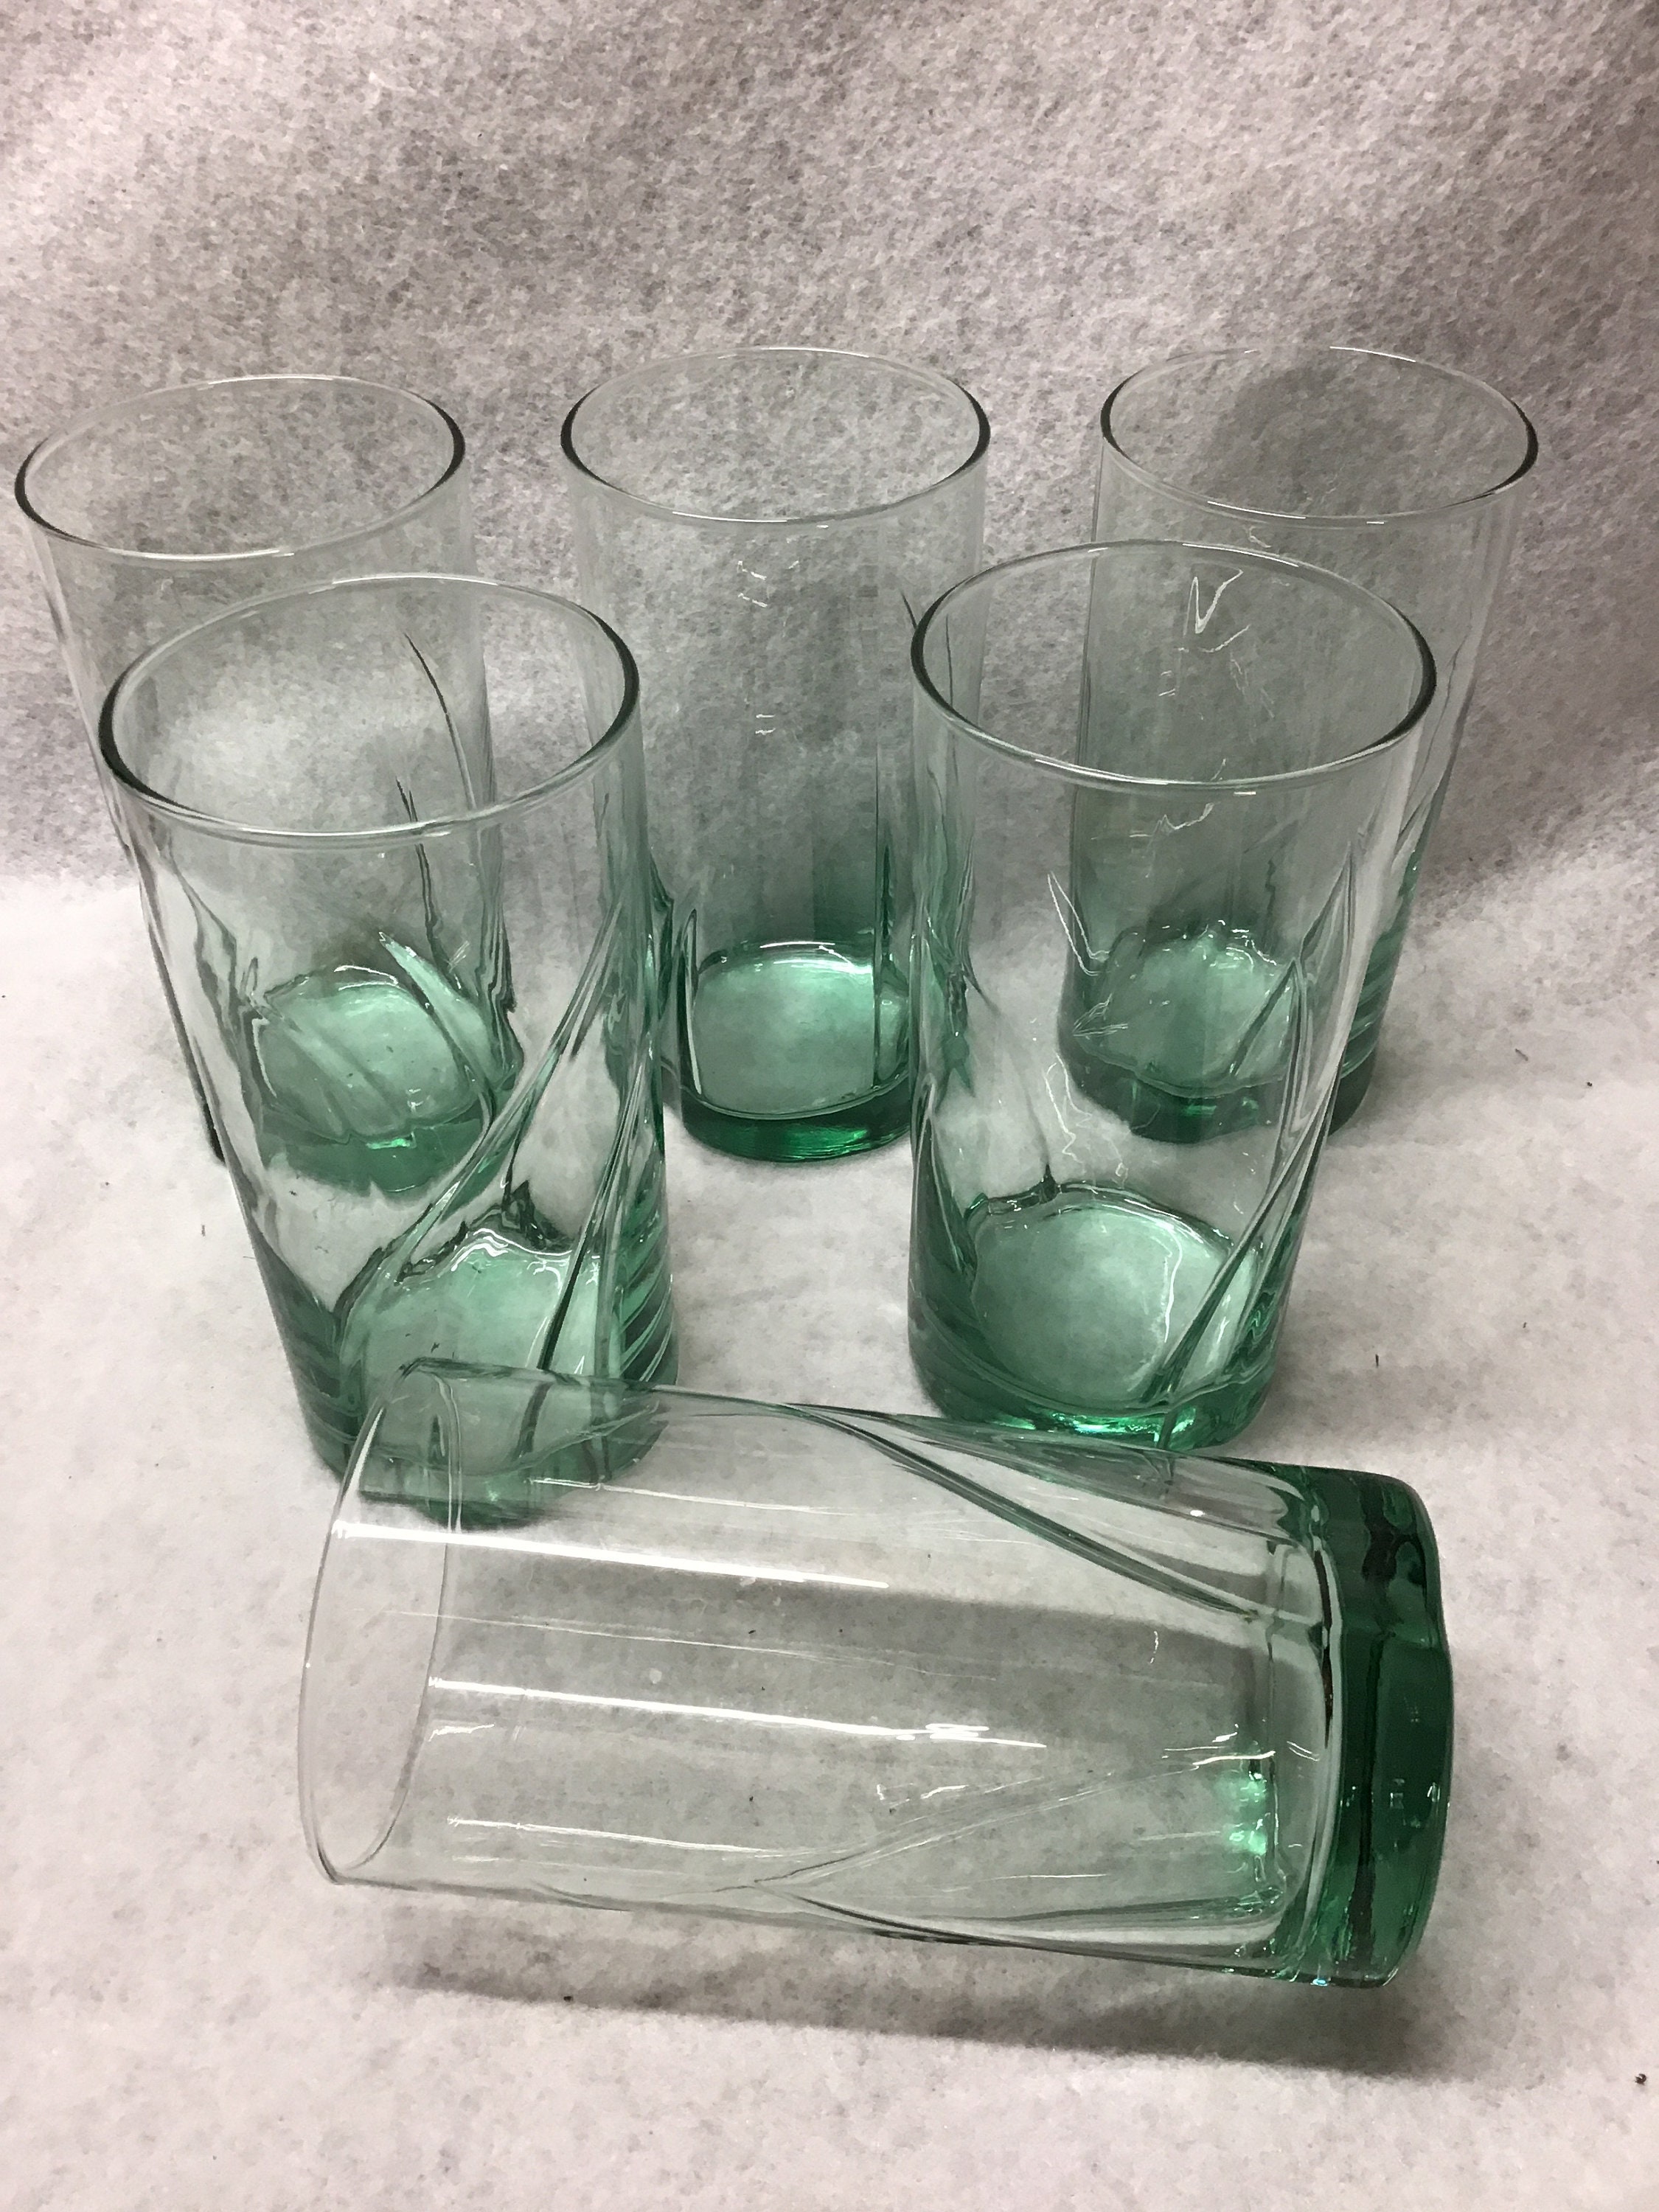 Libbey 16 oz Drinking Glasses Tumblers Set Of 4 Rings / Ribbed Clear Glass